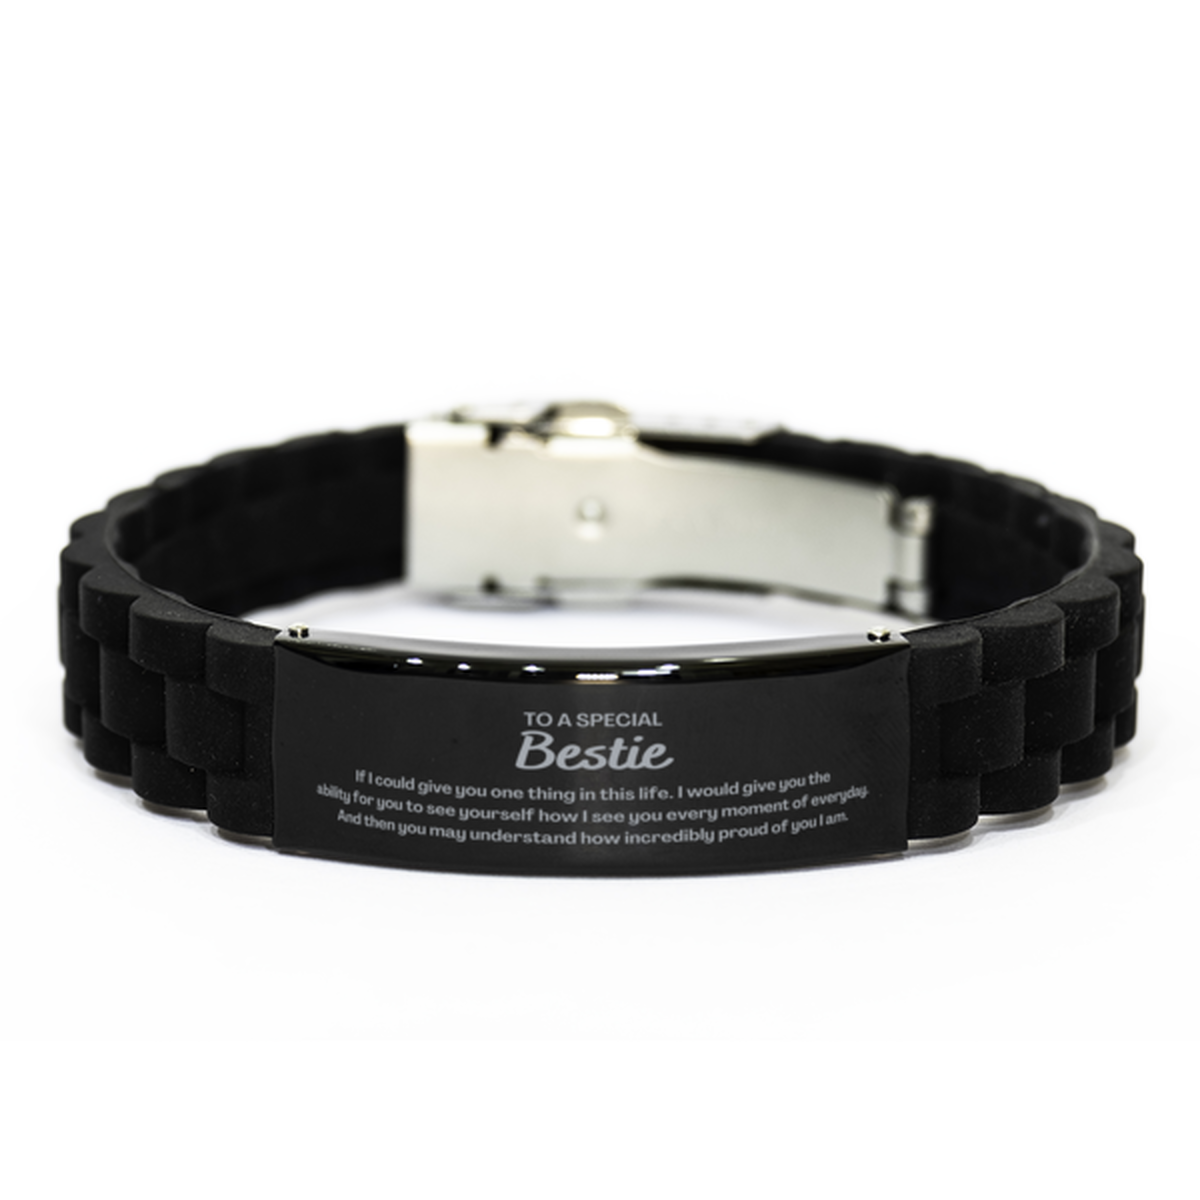 To My Bestie Black Glidelock Clasp Bracelet, Gifts For Bestie Engraved, Inspirational Gifts for Christmas Birthday, Epic Gifts for Bestie To A Special Bestie how incredibly proud of you I am